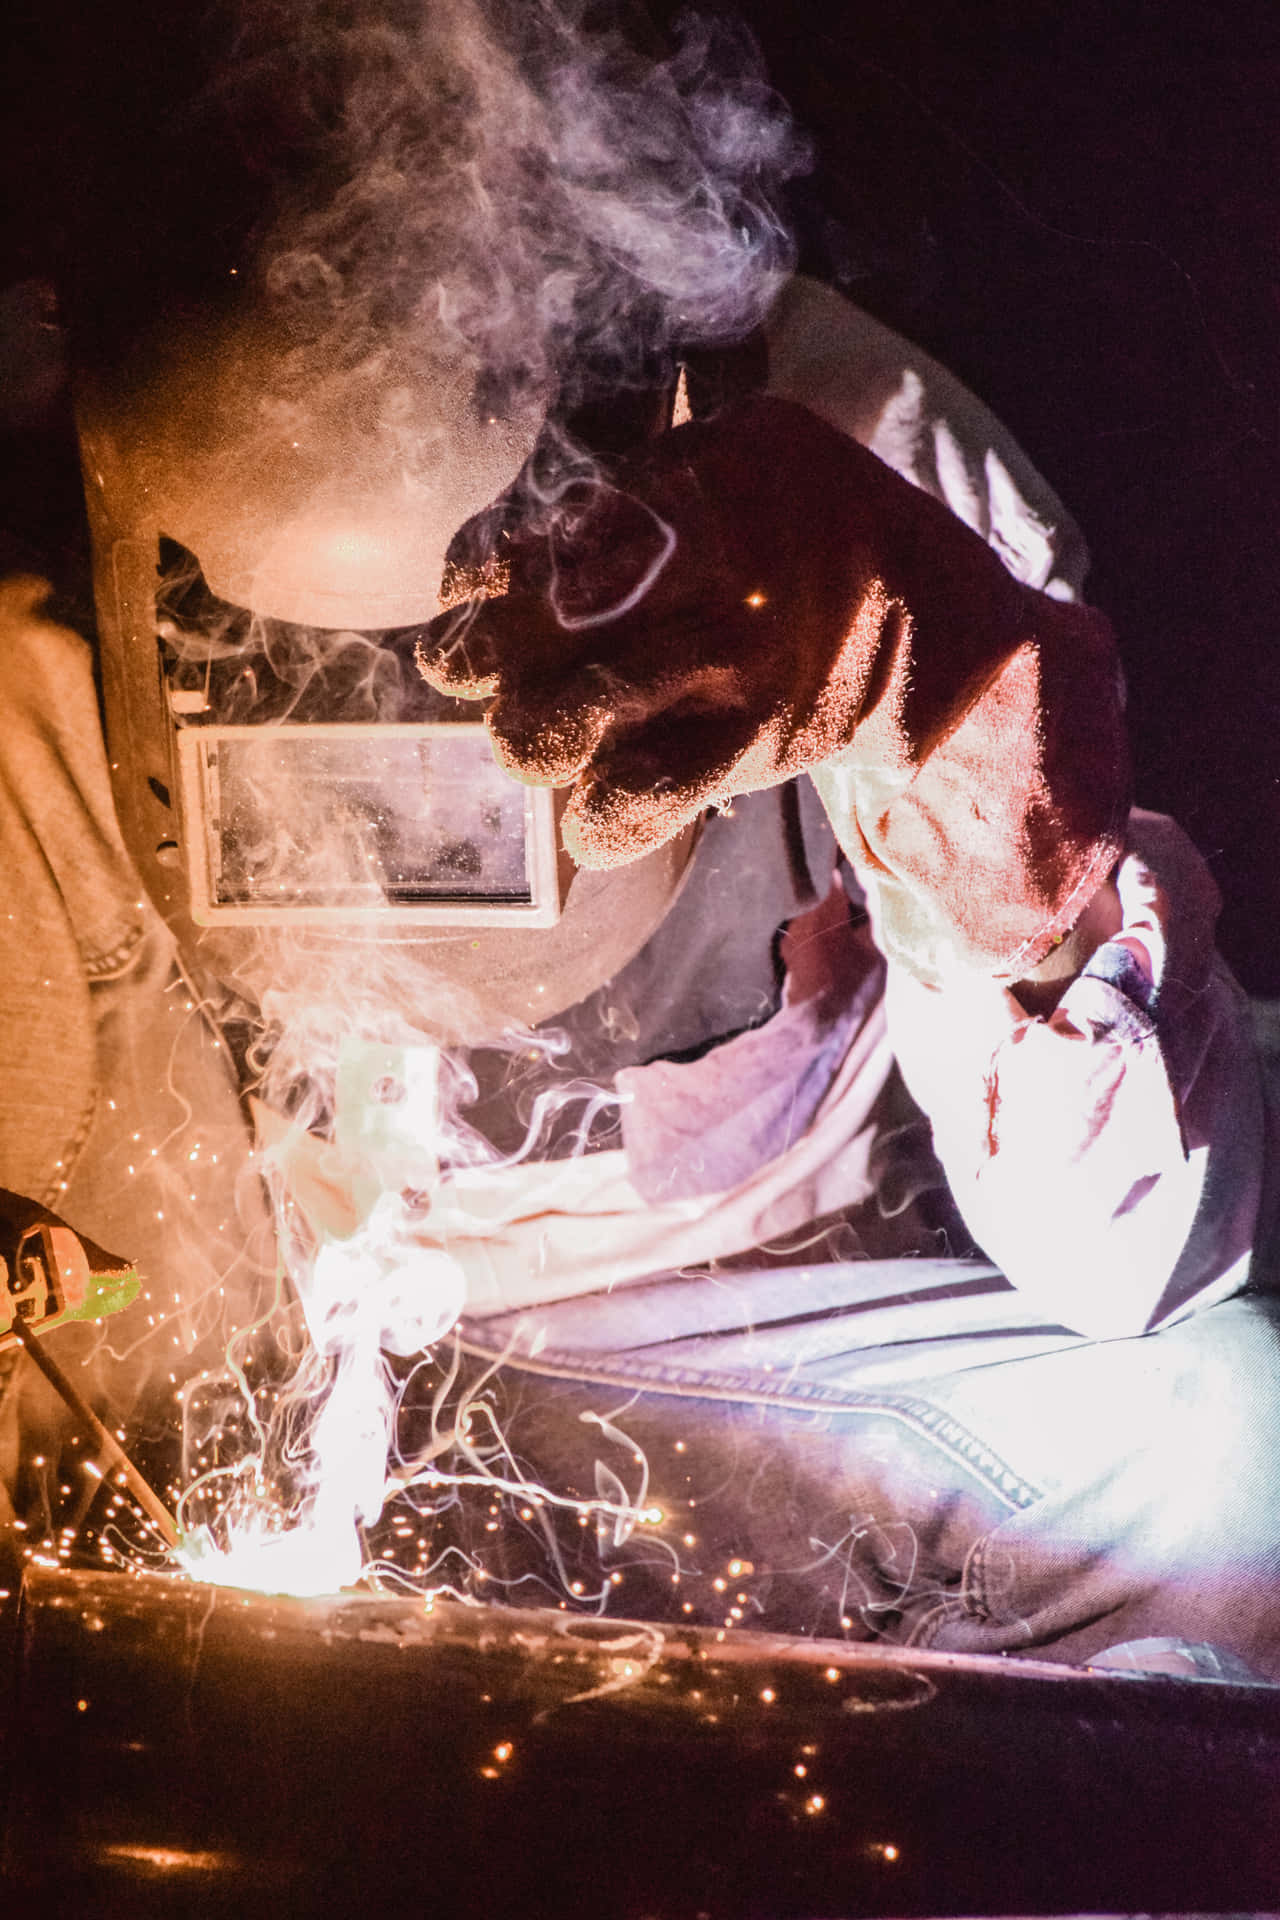 A Man Welding On A Car At Night Background